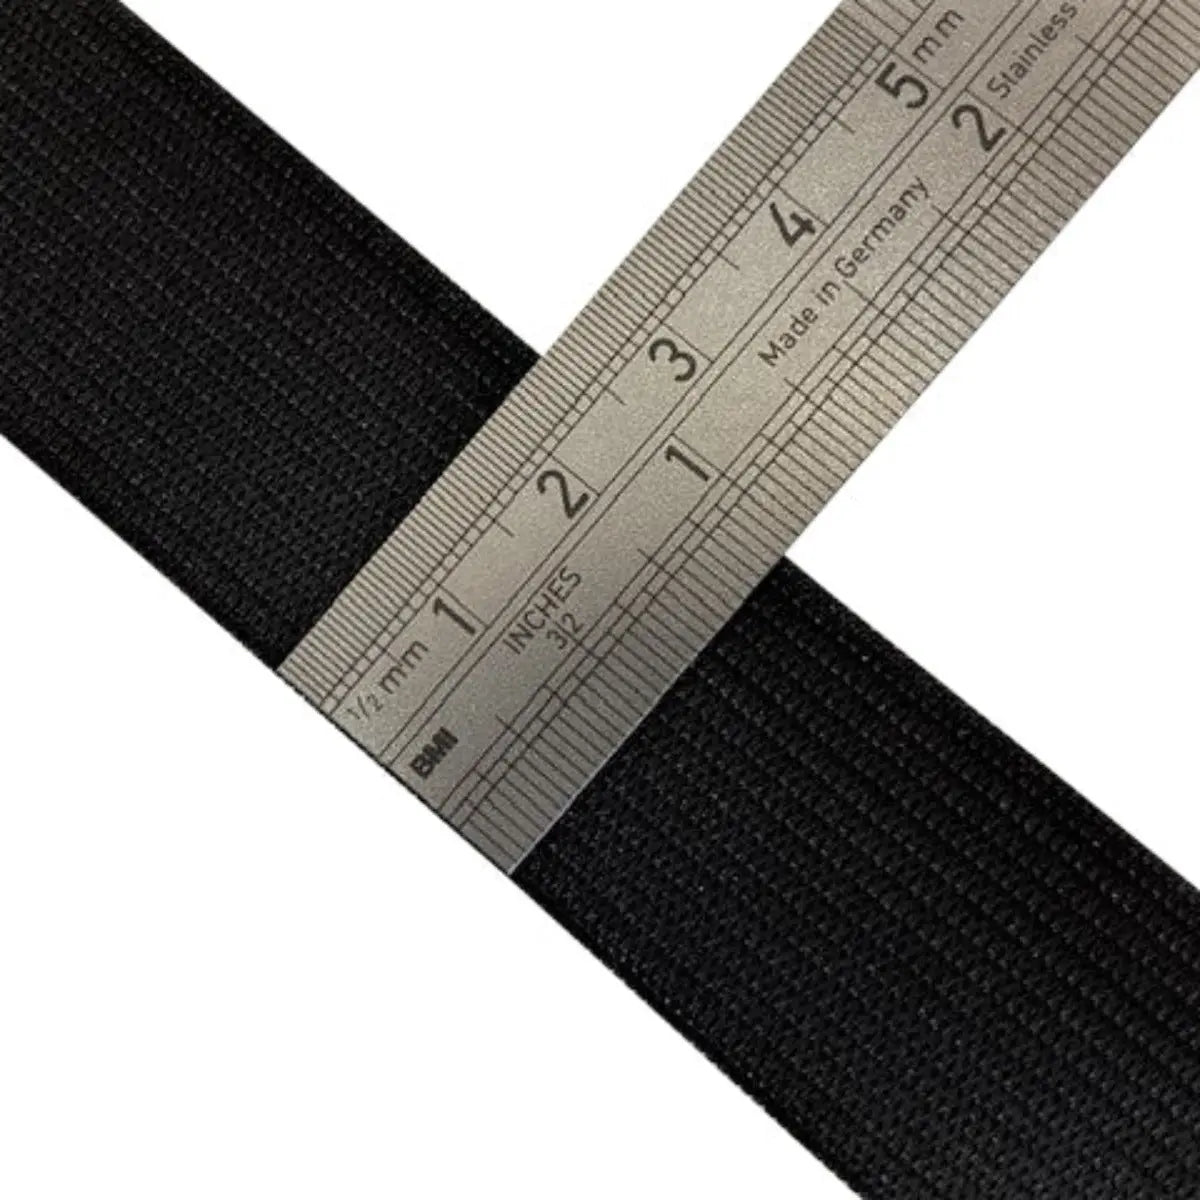 Knitted Elastic, Skirts, Dresses, Trousers, Cuffs, Waistbands, Garment Production